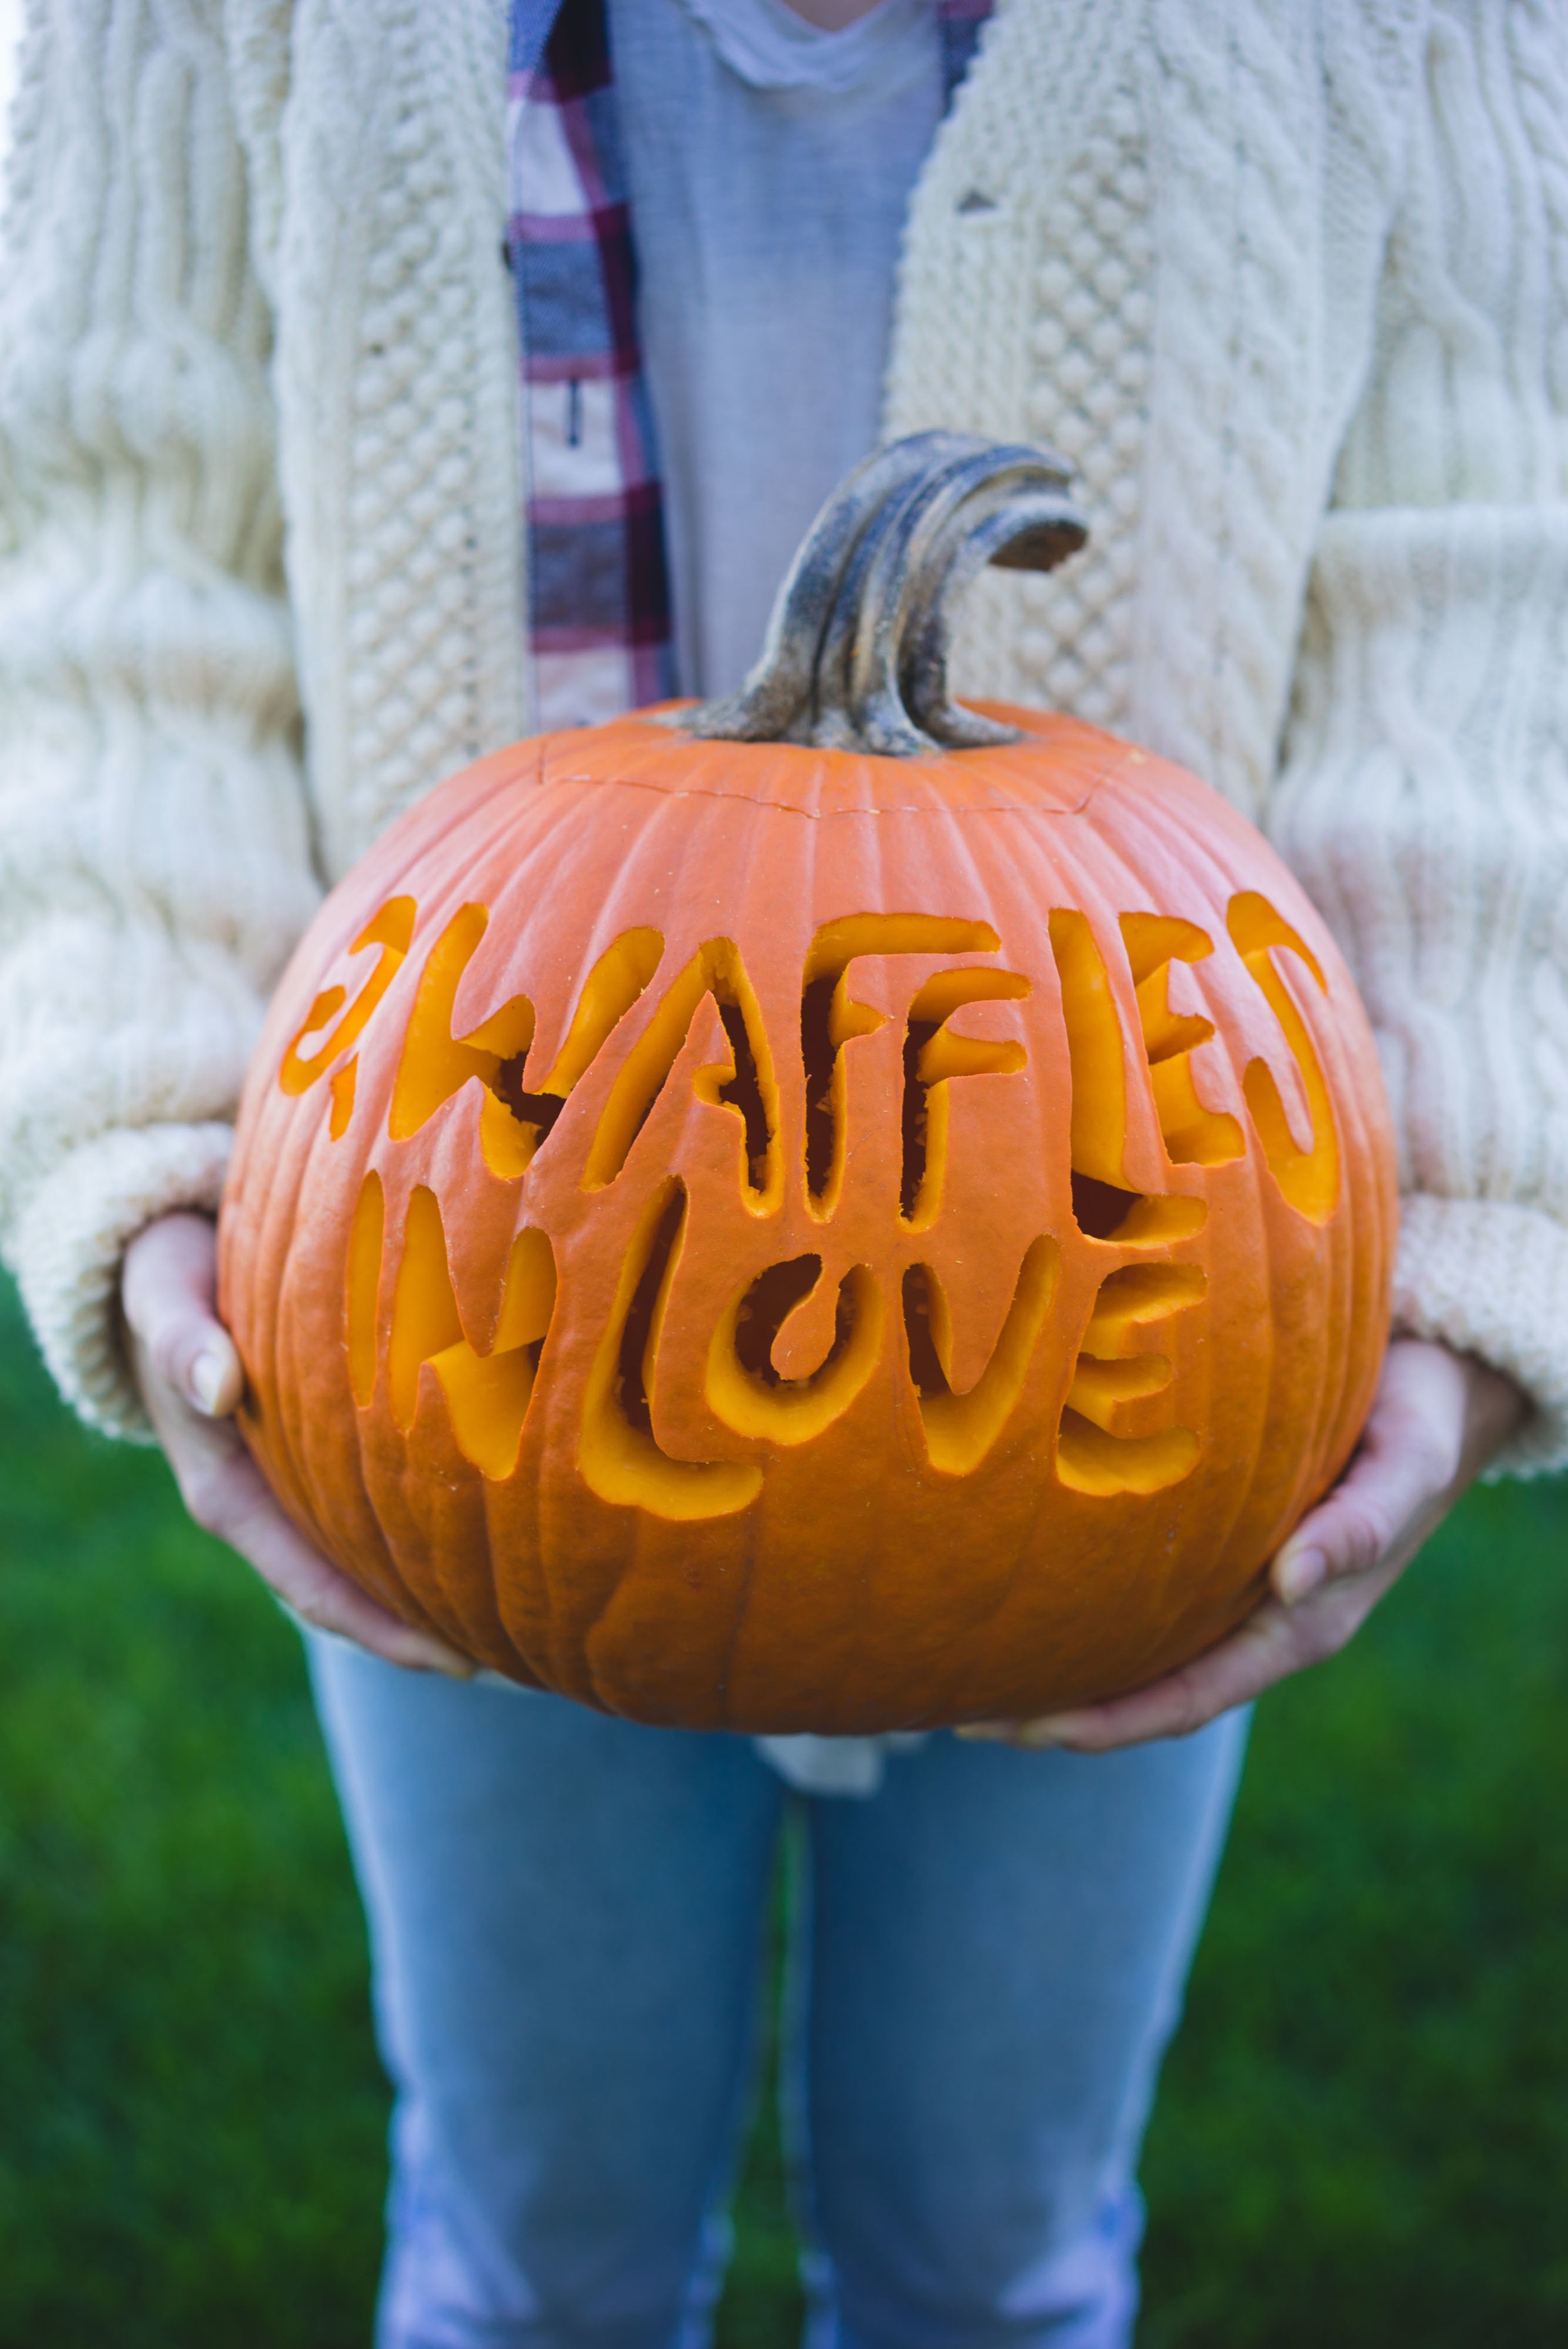  MAK carved a pumpkin for the wedding that says #2wafflesinlove 